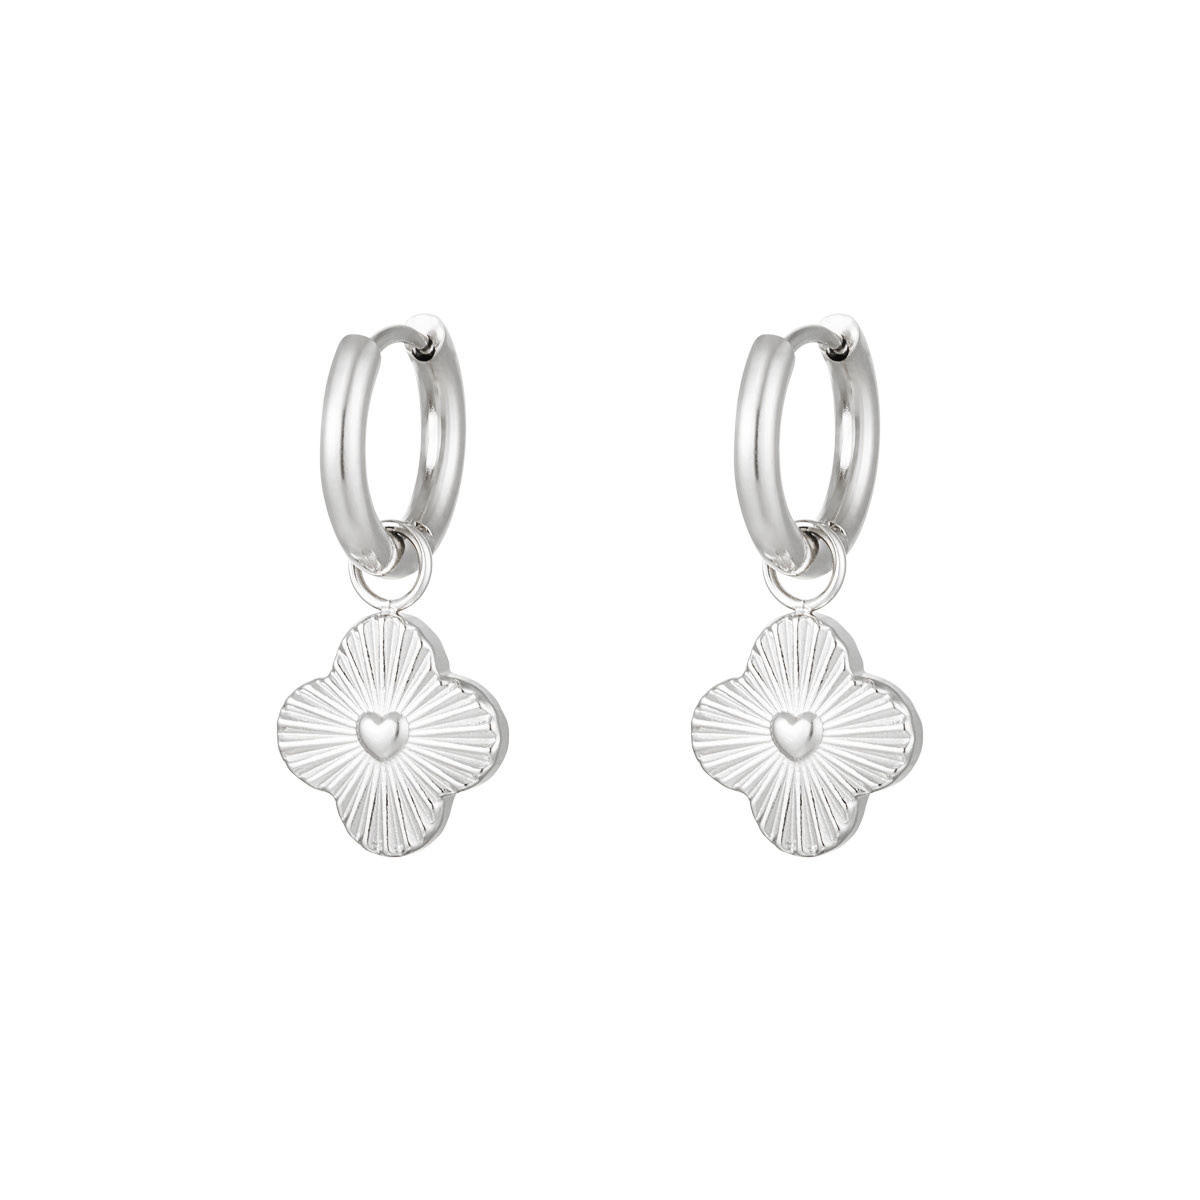 With love earring - Silver- hearts flower